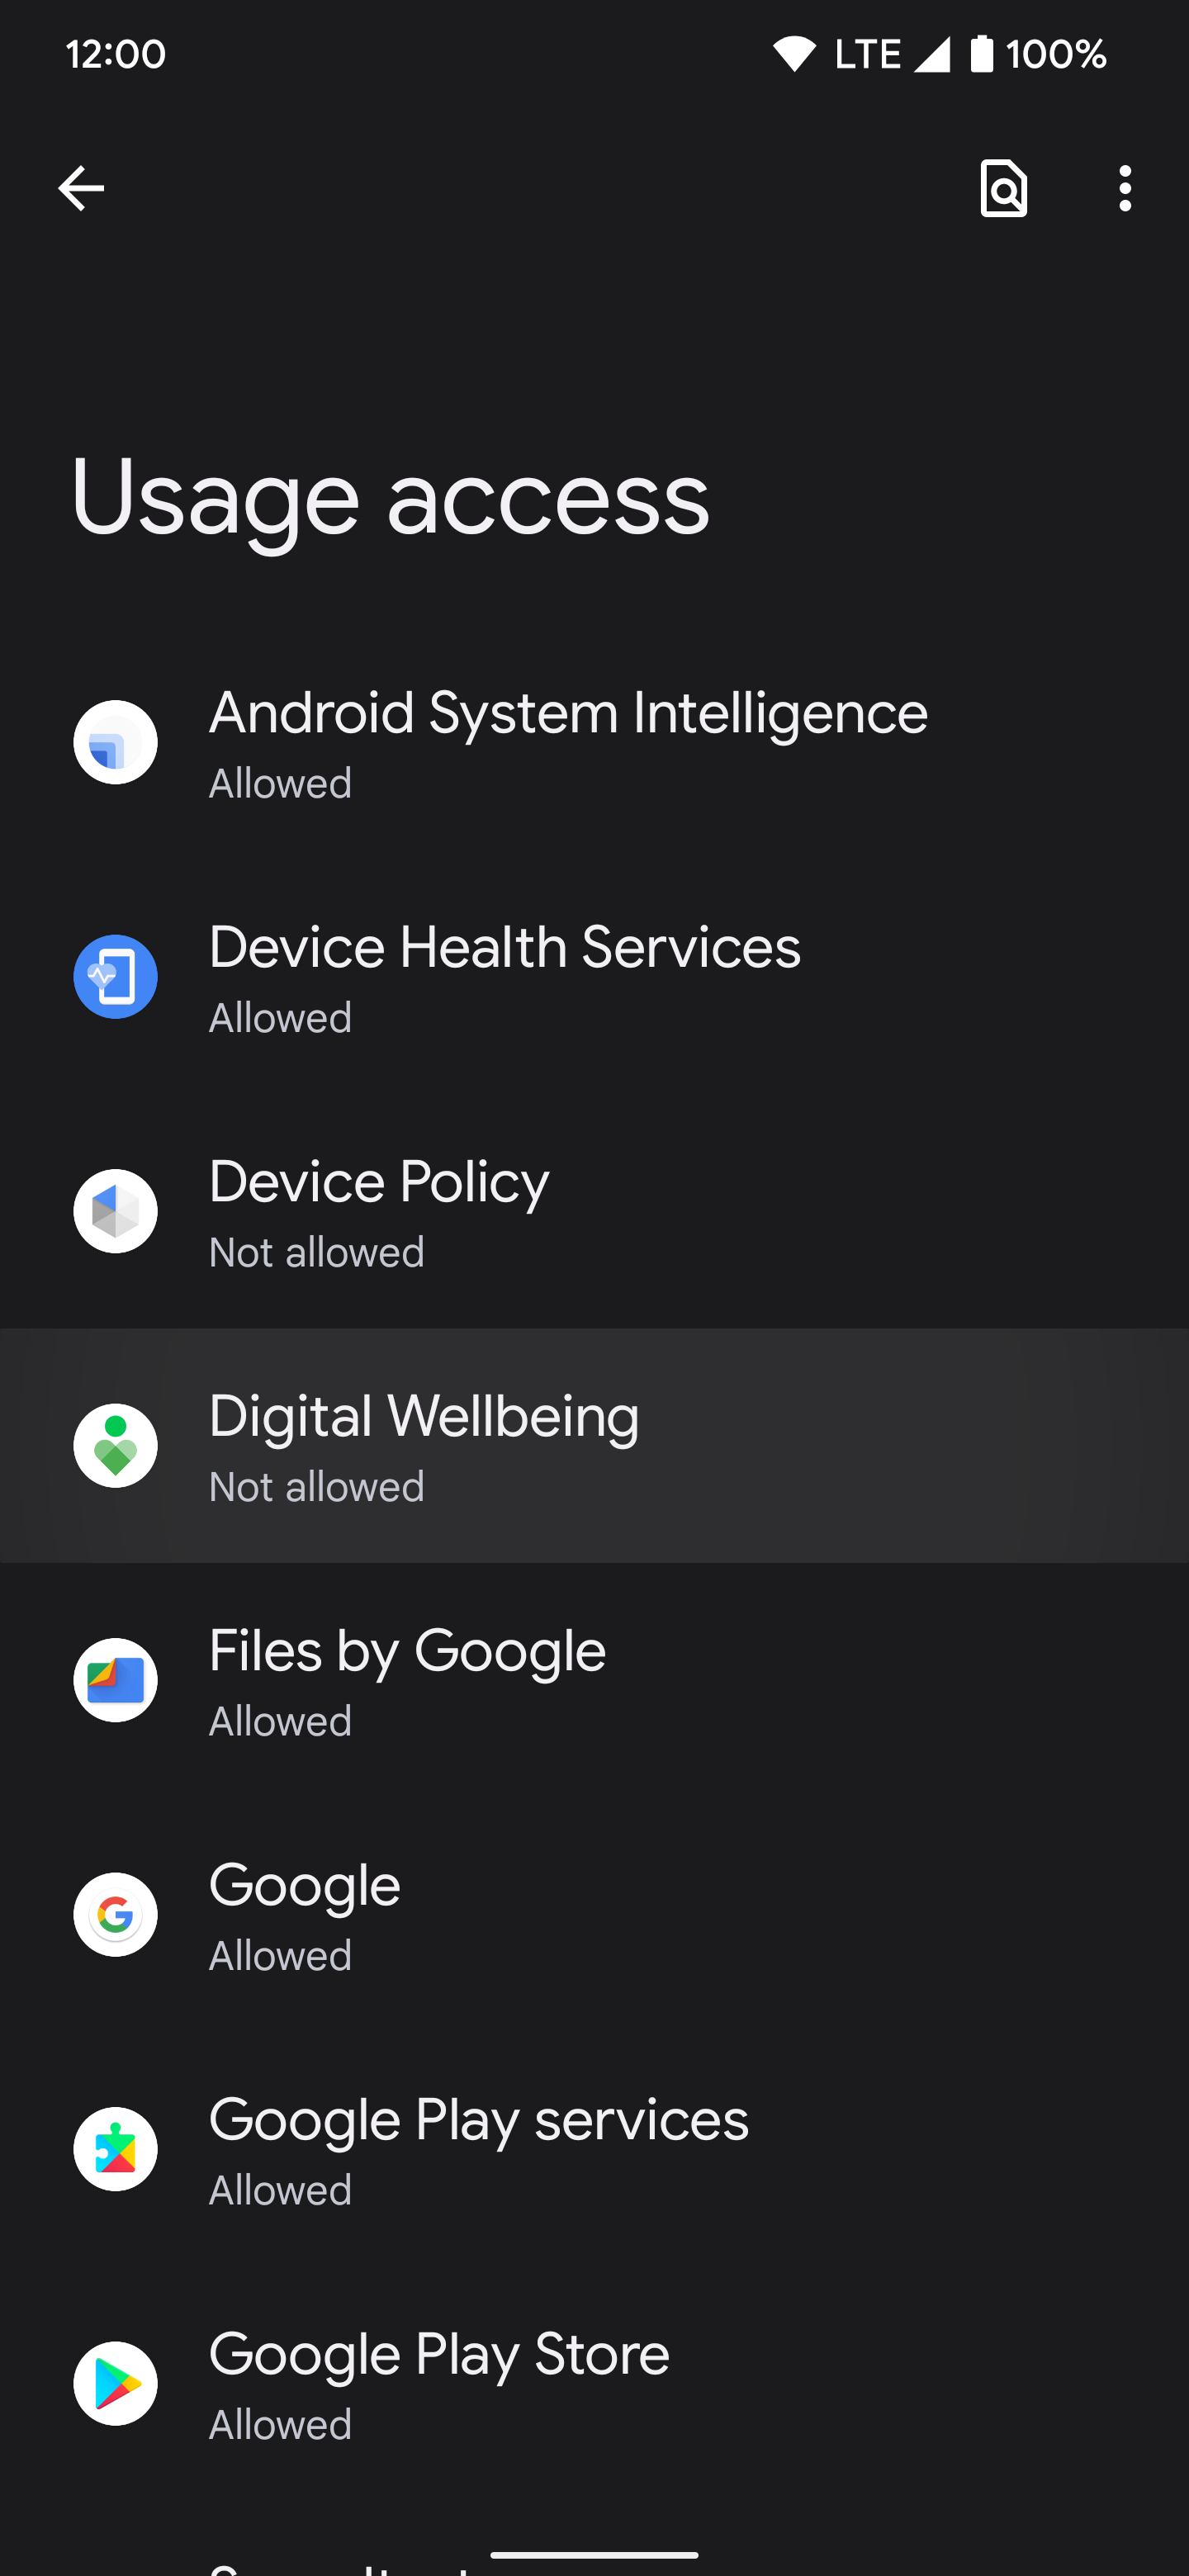 Screenshot shows the 'Usage Access' page in settings, with several app options and the Digital Wellbeing app icon highlighted.